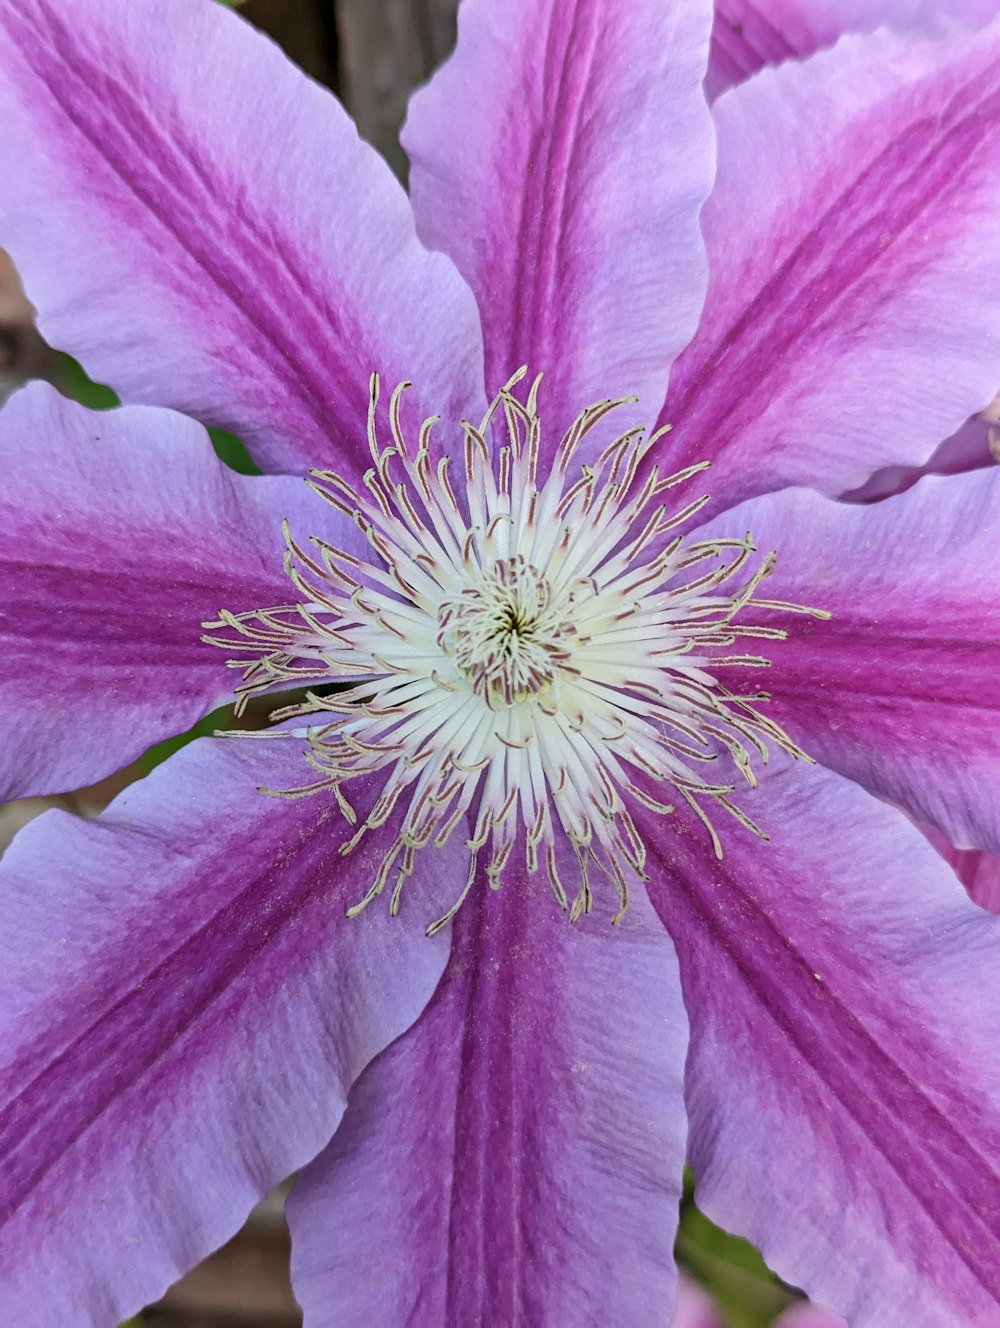 a close up of a purple flower with white stamen